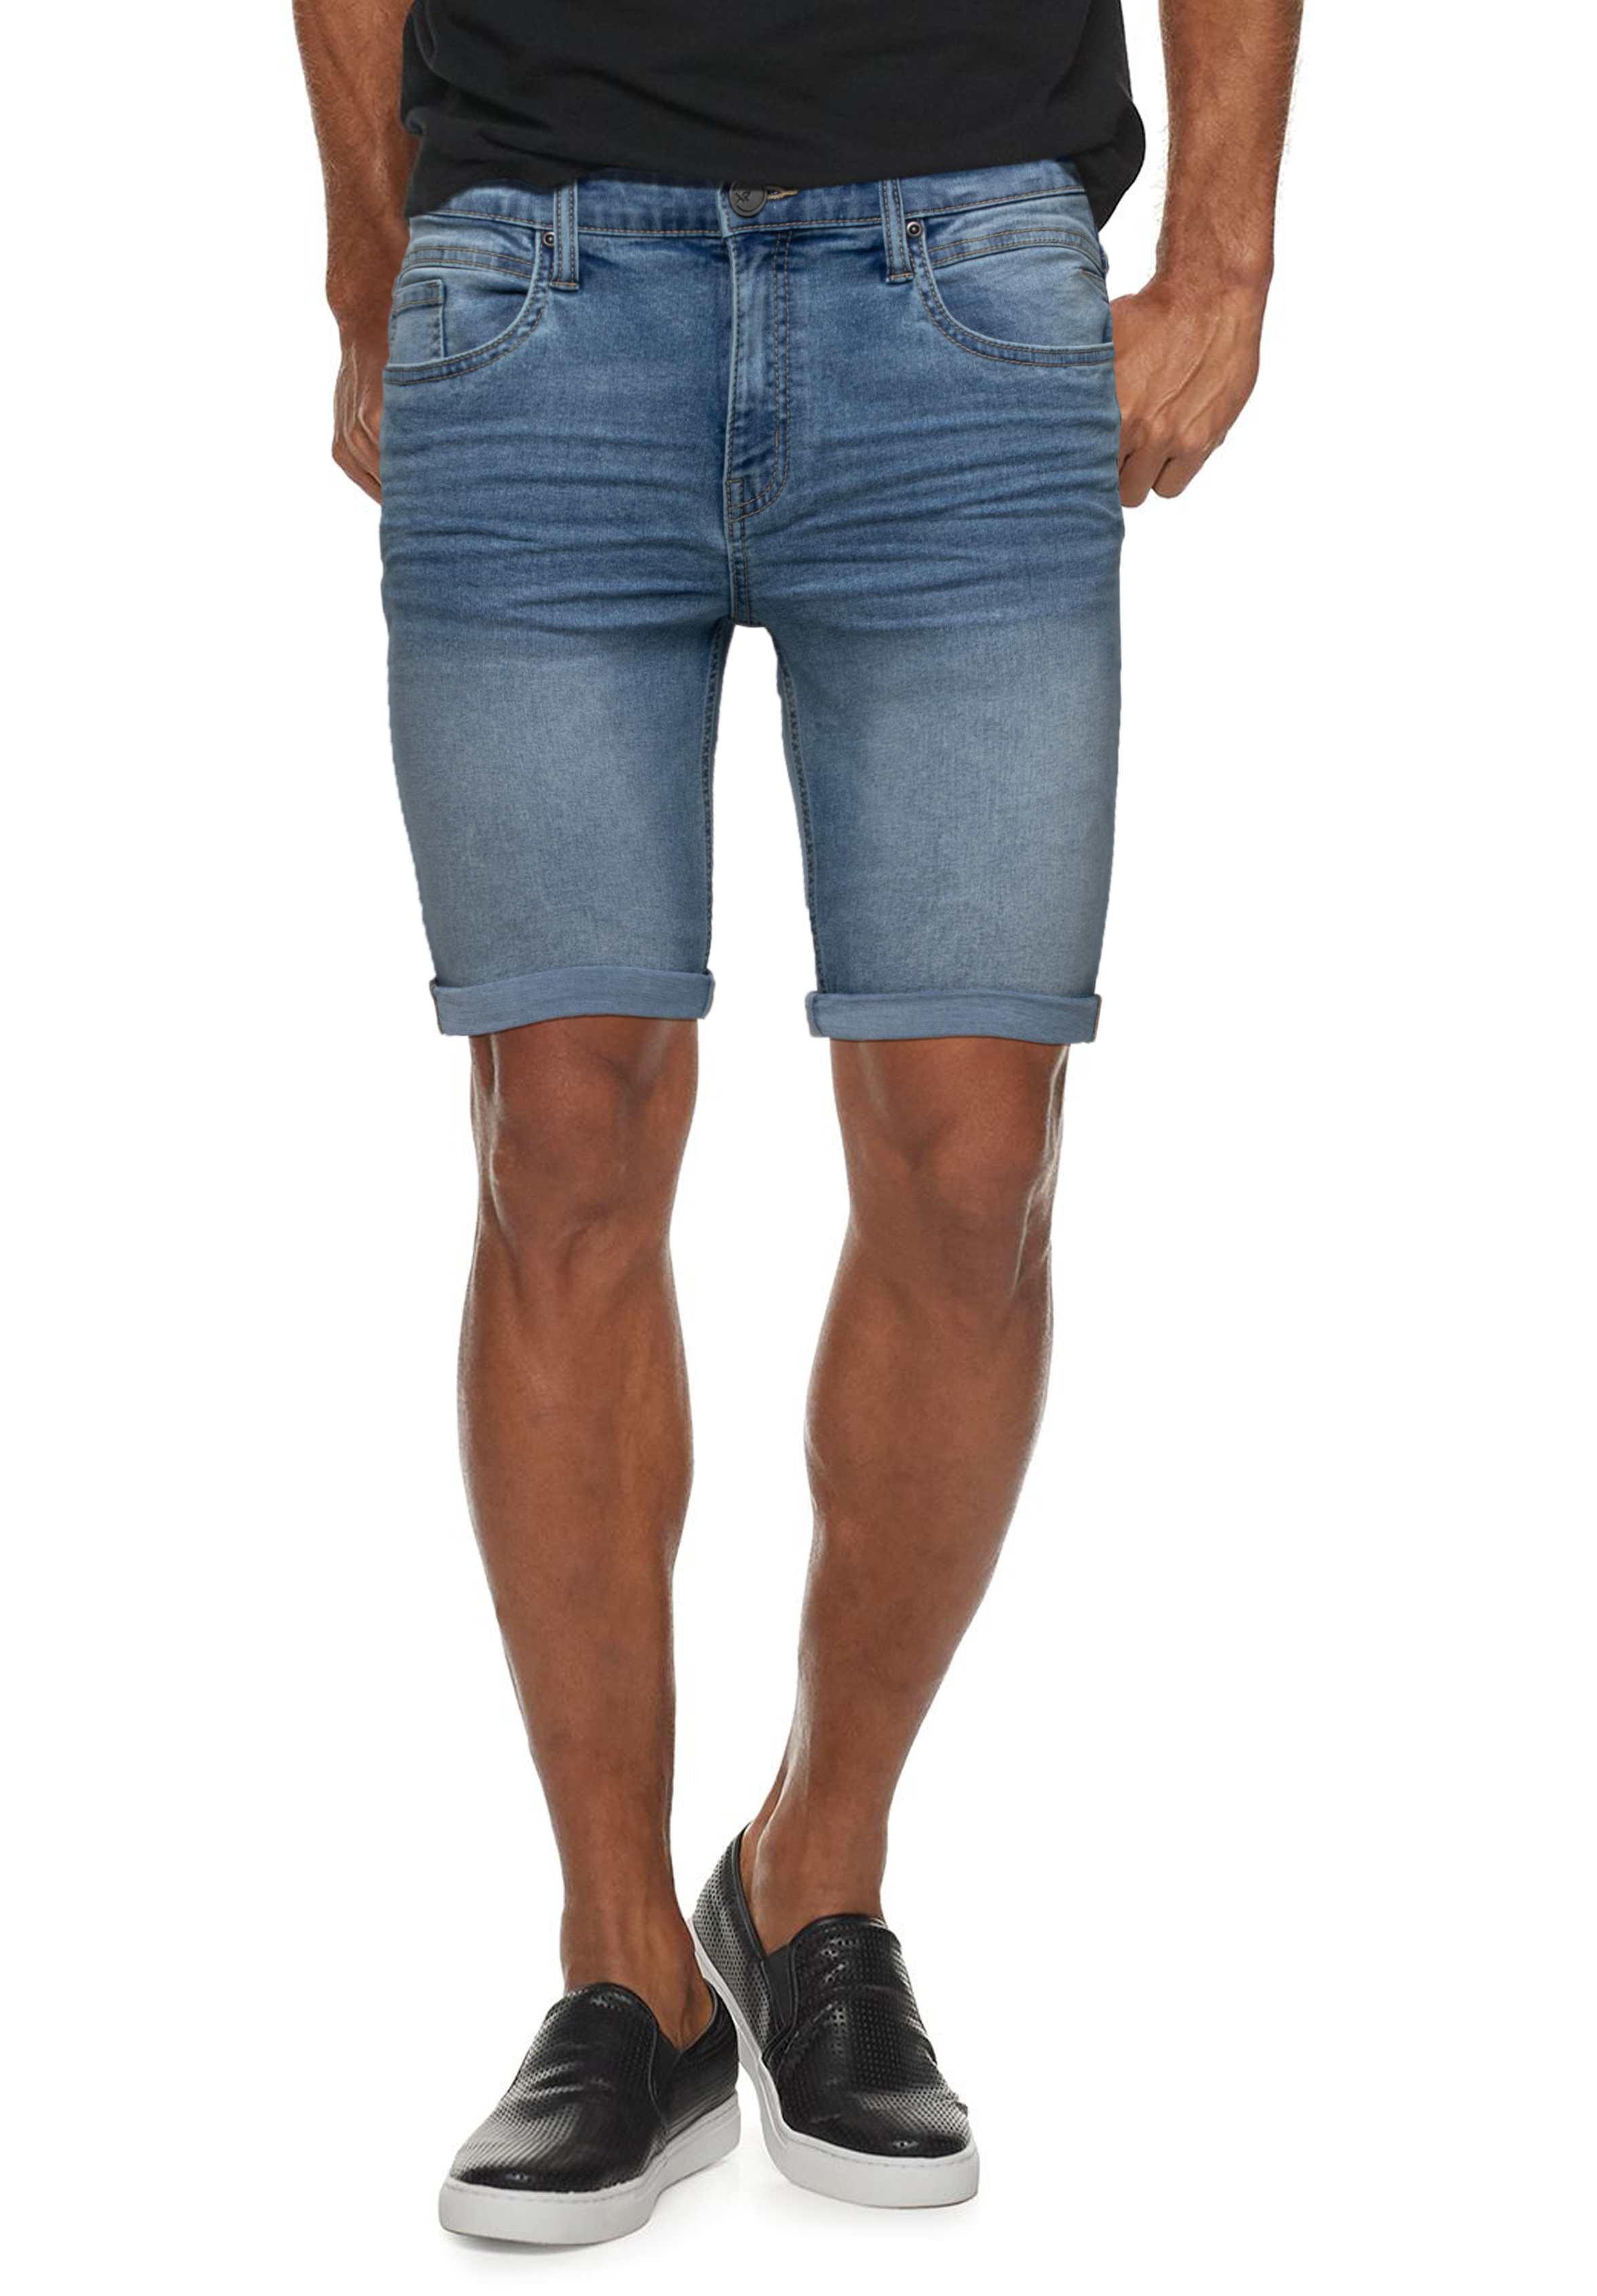 X RAY Men's Rolled Up Denim Shorts, Stretch Slim Skinny Fit, Distressed, Ripped, Bermuda Jeans Short, Light Indigo - No Rips, Size 36 - image 1 of 6